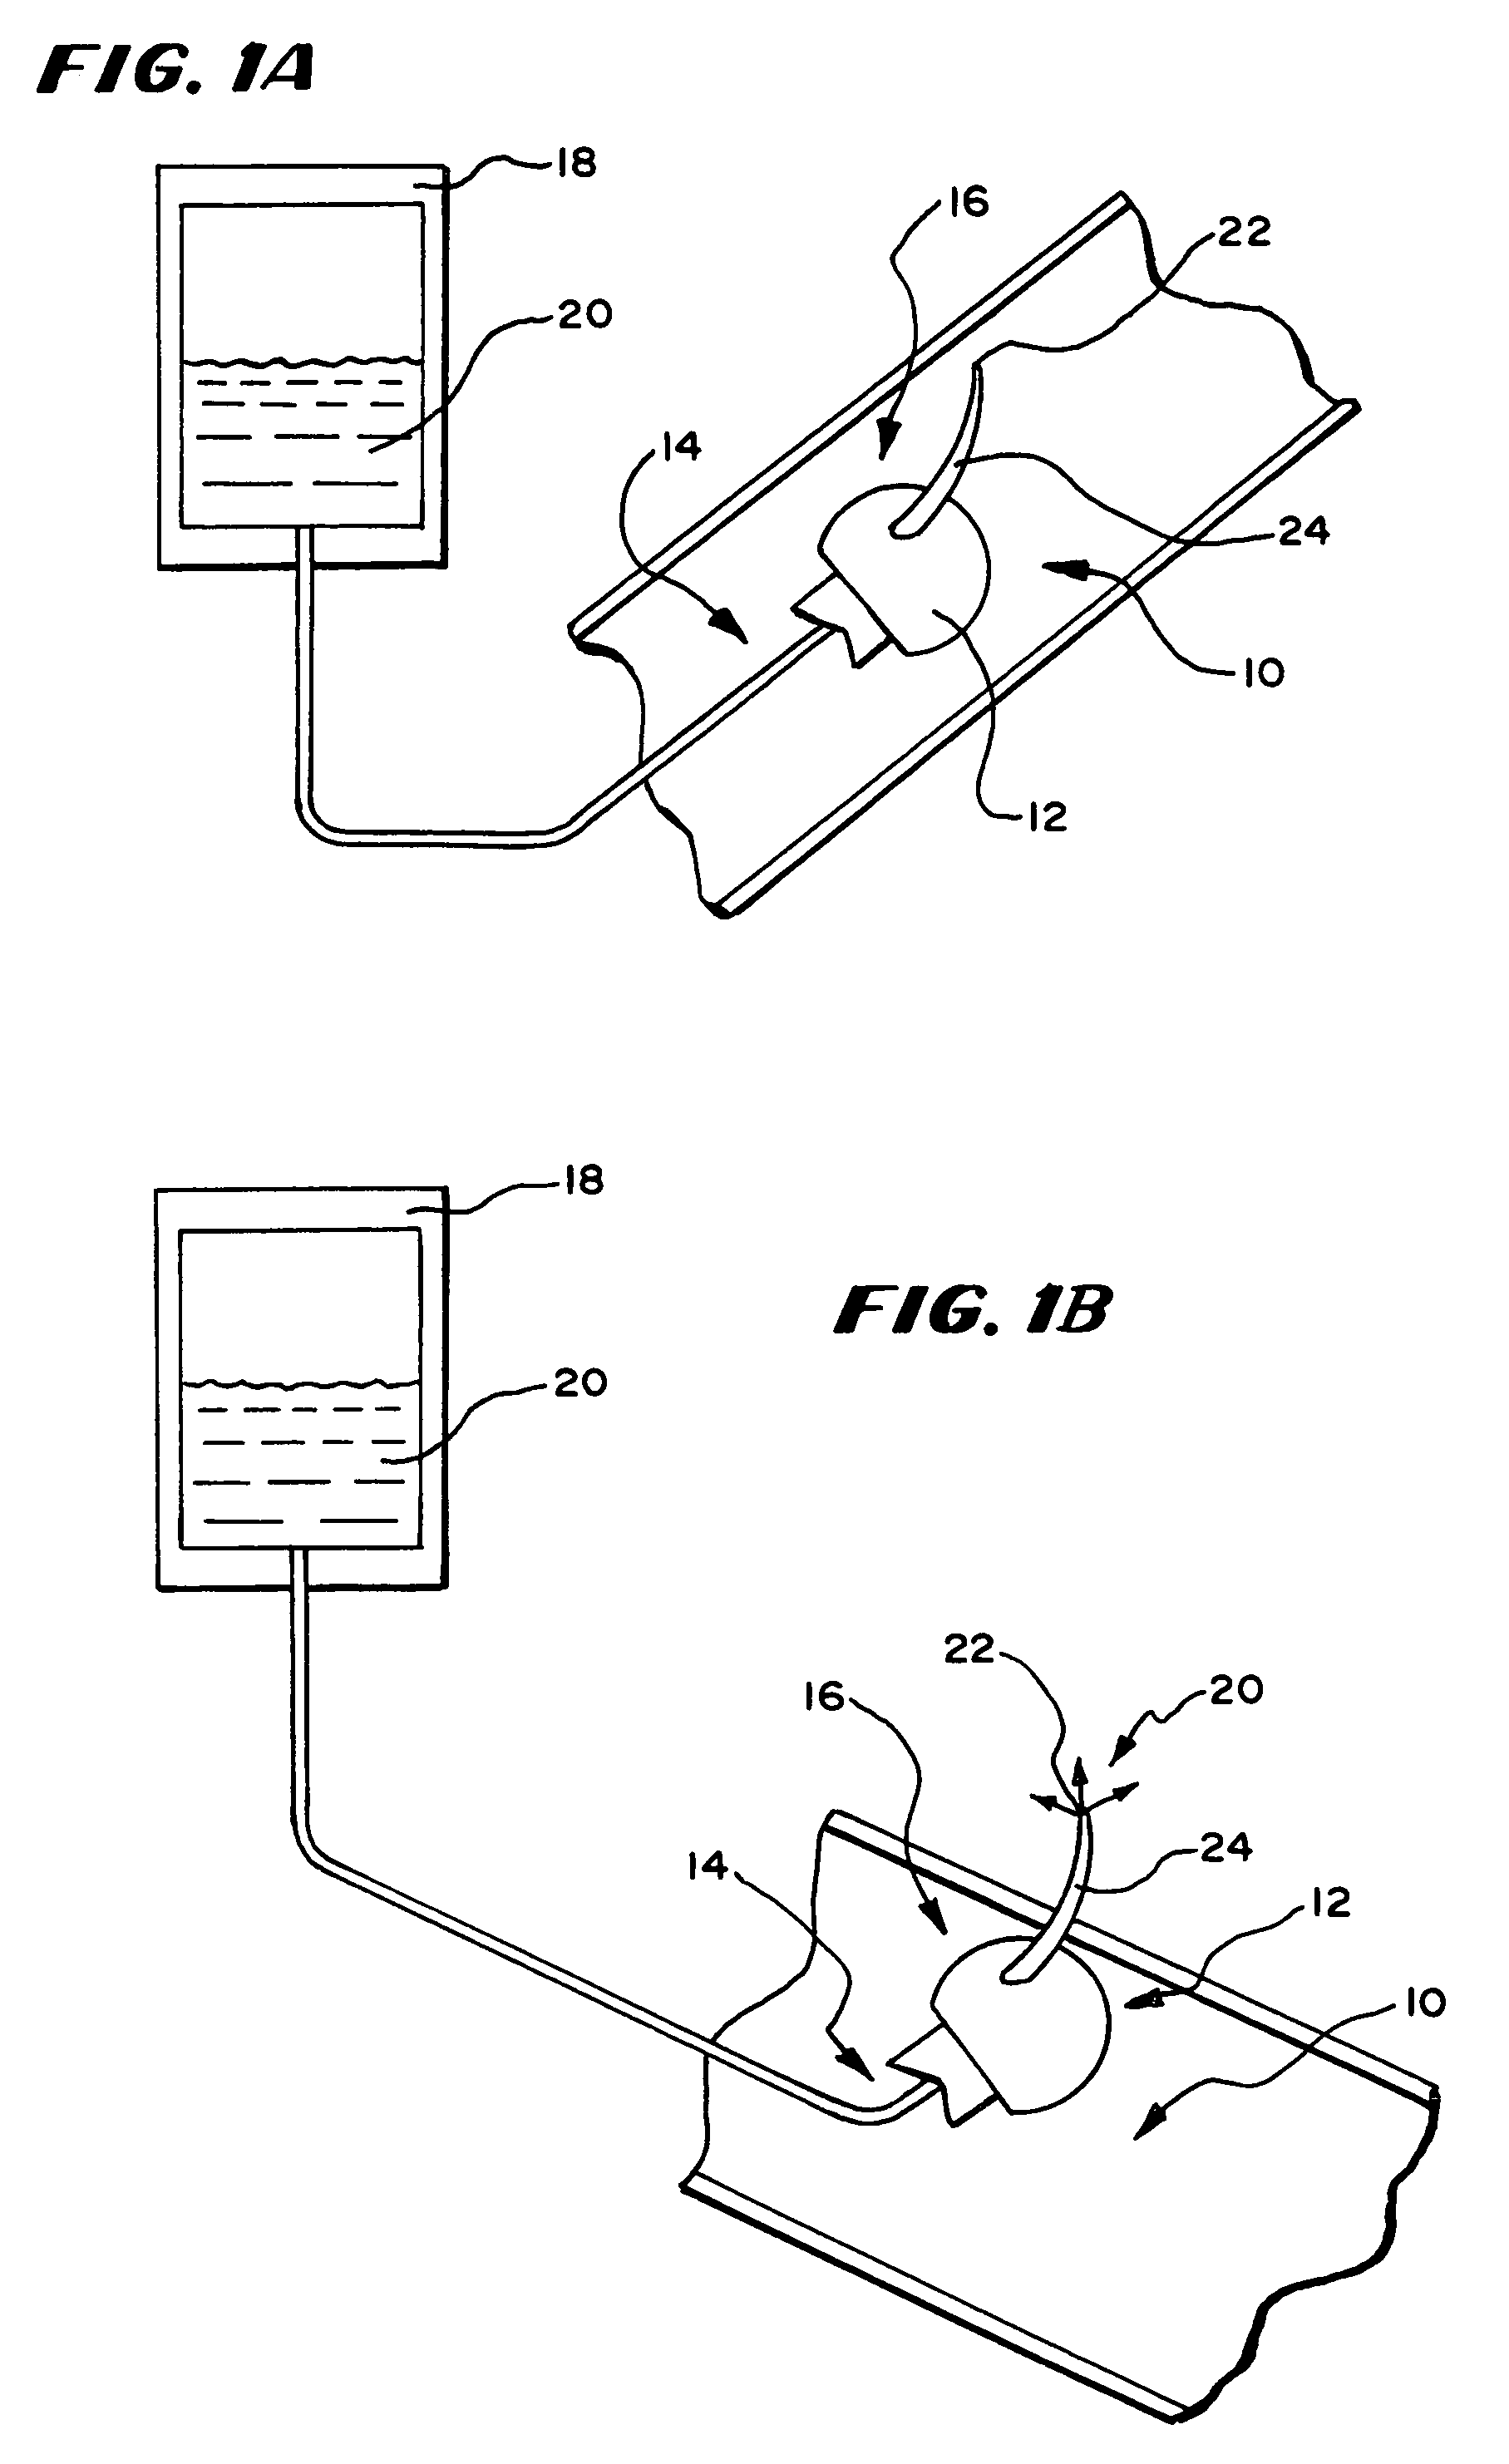 Systems and methods for applying a selected treatment agent into contact with tissue to treat disorders of the gastrointestinal tract